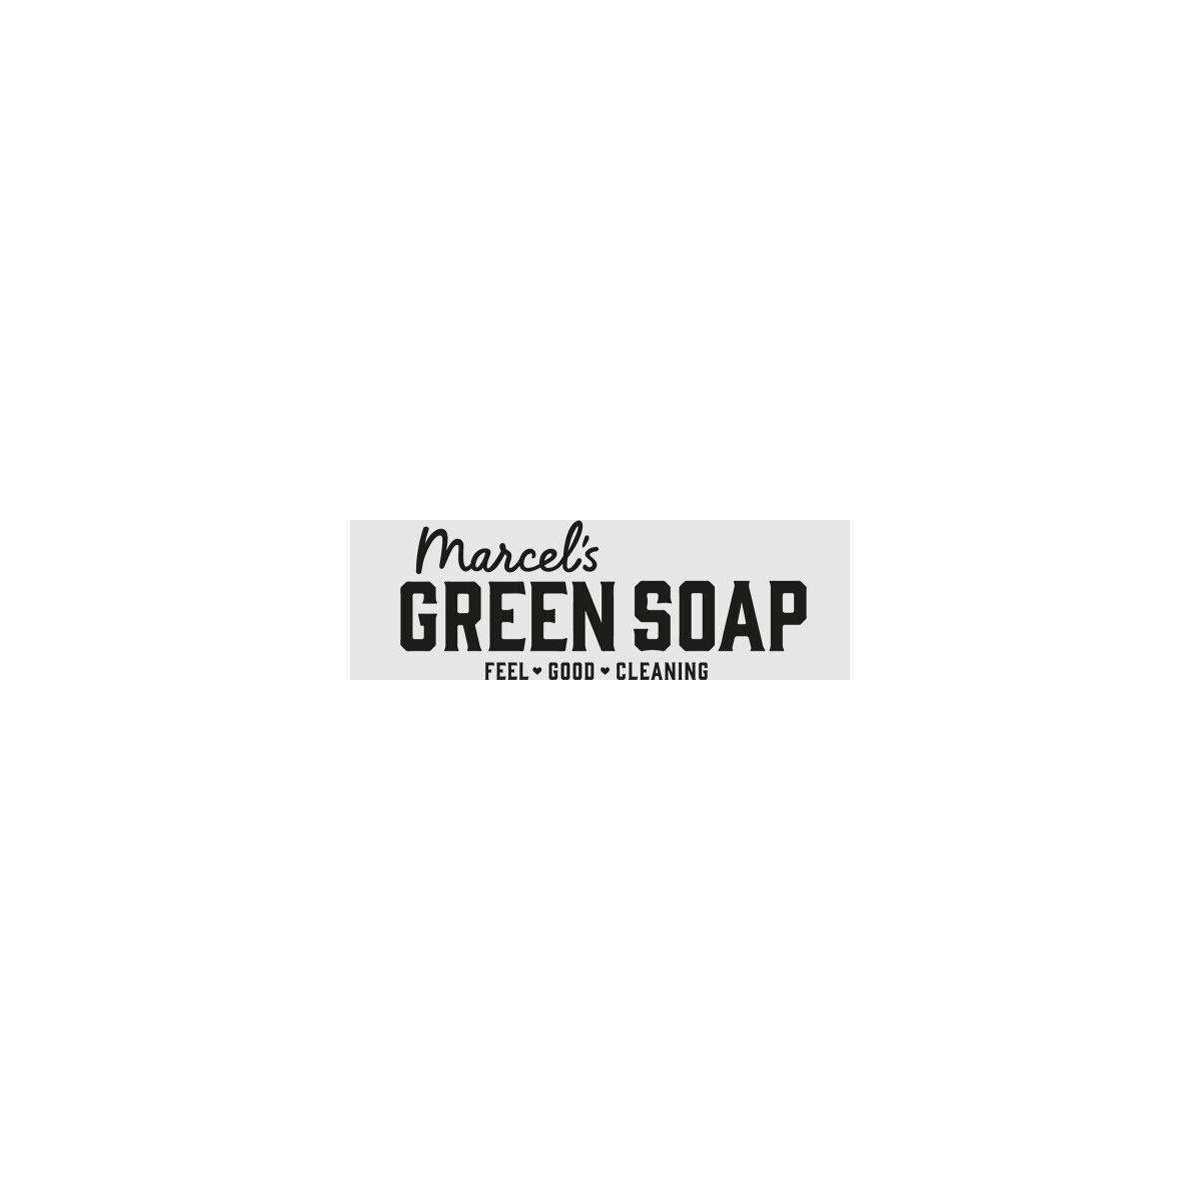 Where to Buy Green Soap Products